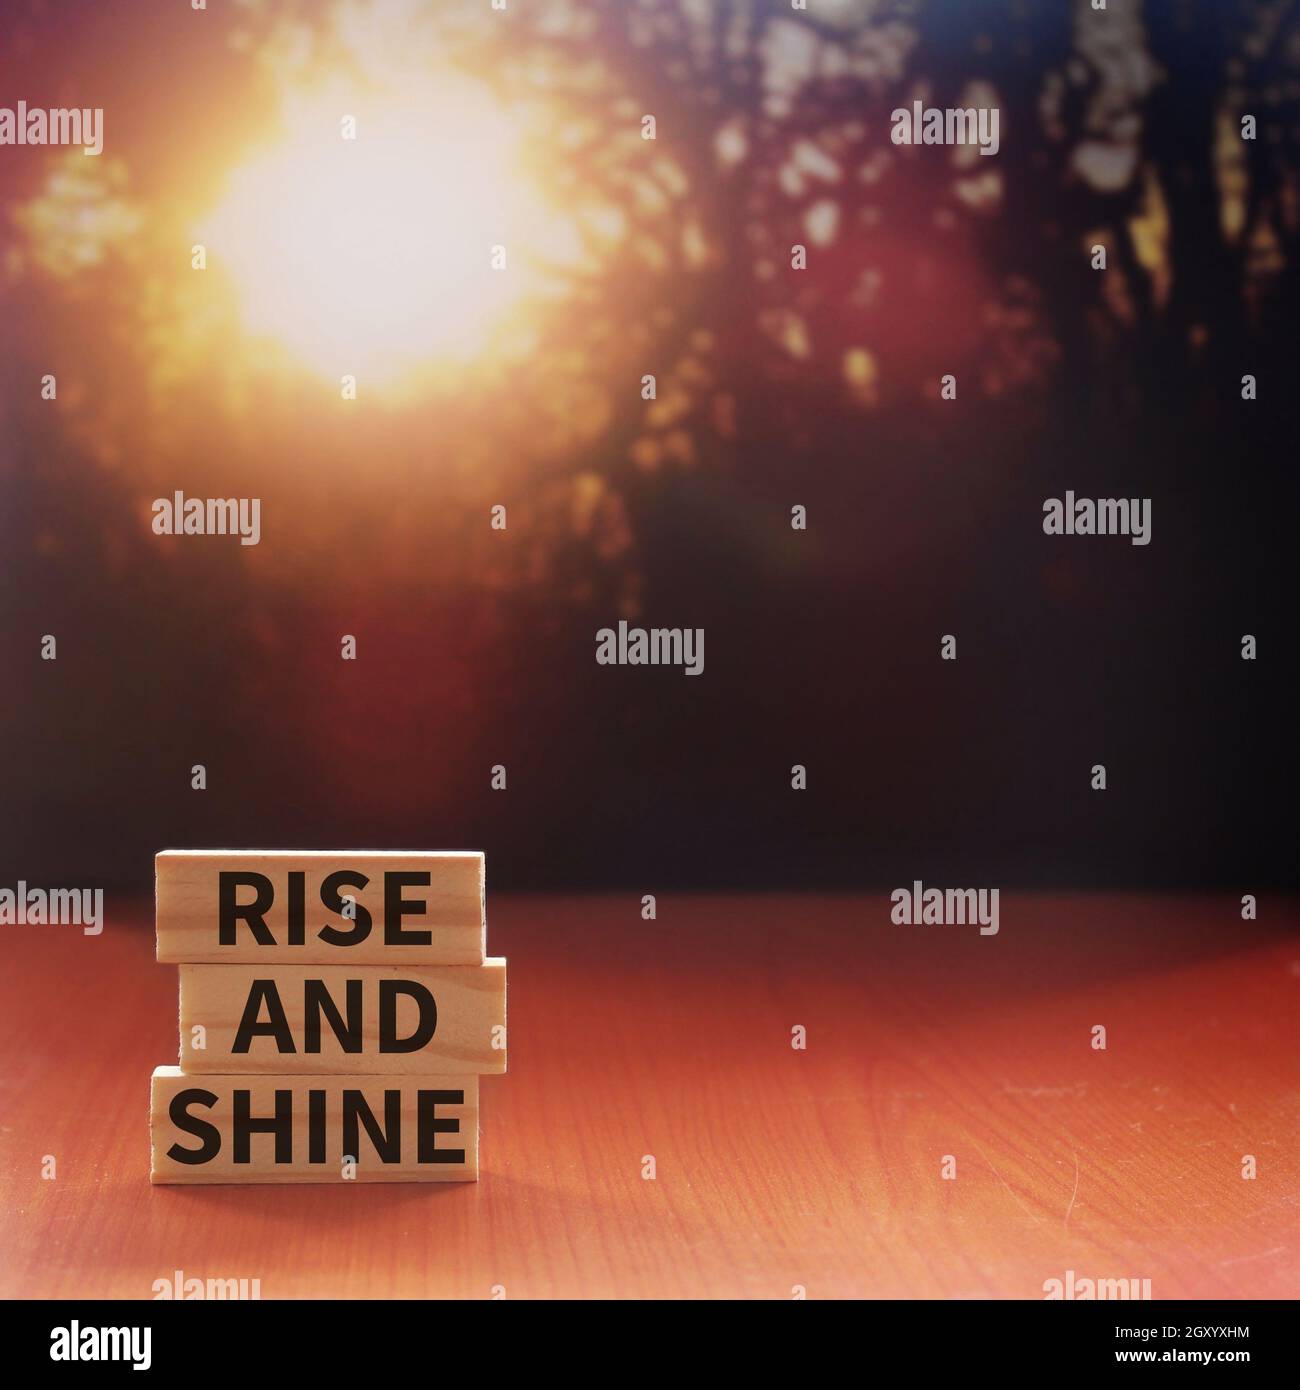 RISE AND SHINE written on wooden tiles with background of bokeh sunrise. Copy space for text Stock Photo